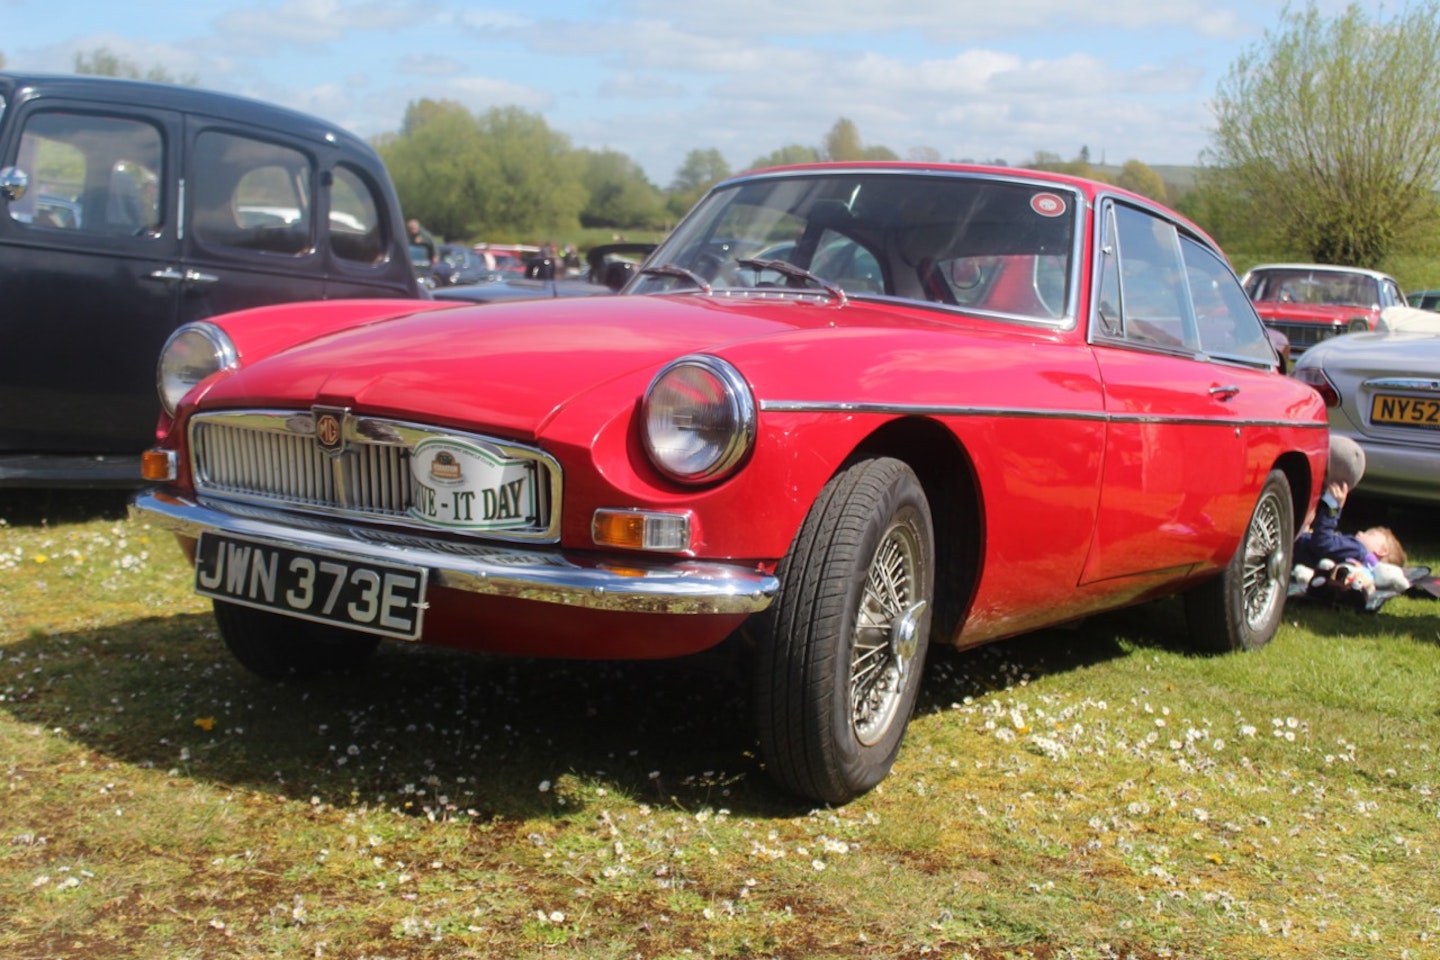 Simon Sugden’s 1967 MGB GT at the Atwell-Wilson Museum.